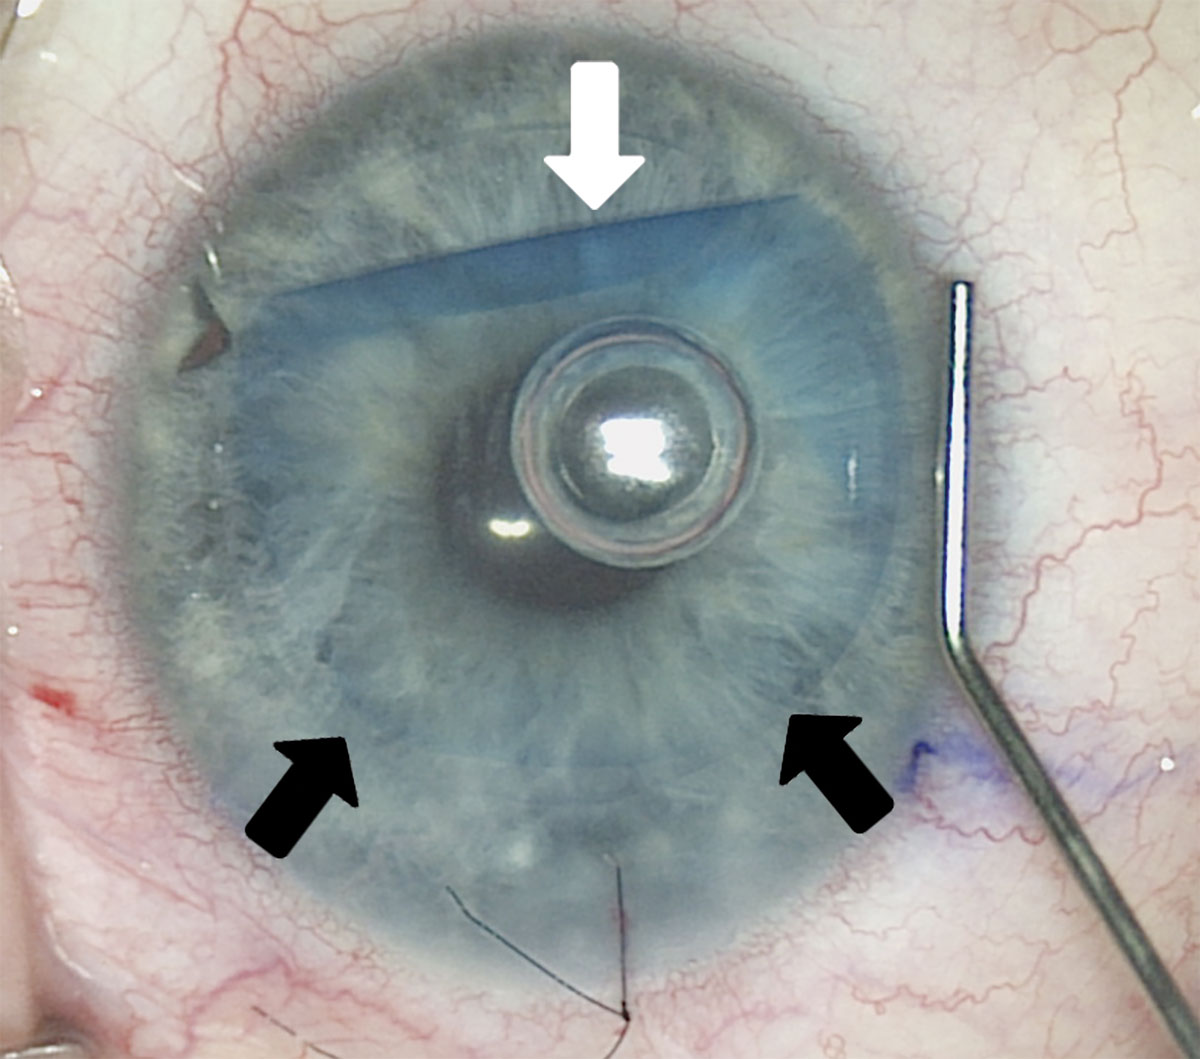 Visual outcomes were comparable for eyes undergoing repeat DMEK for technical failure with controls but were worse for those undergoing the procedure for secondary graft failure. This may be due to a longer duration of corneal edema in these eyes, which would also partially explain higher rates of post-op anterior backscattering when compared with the technical failure eyes.